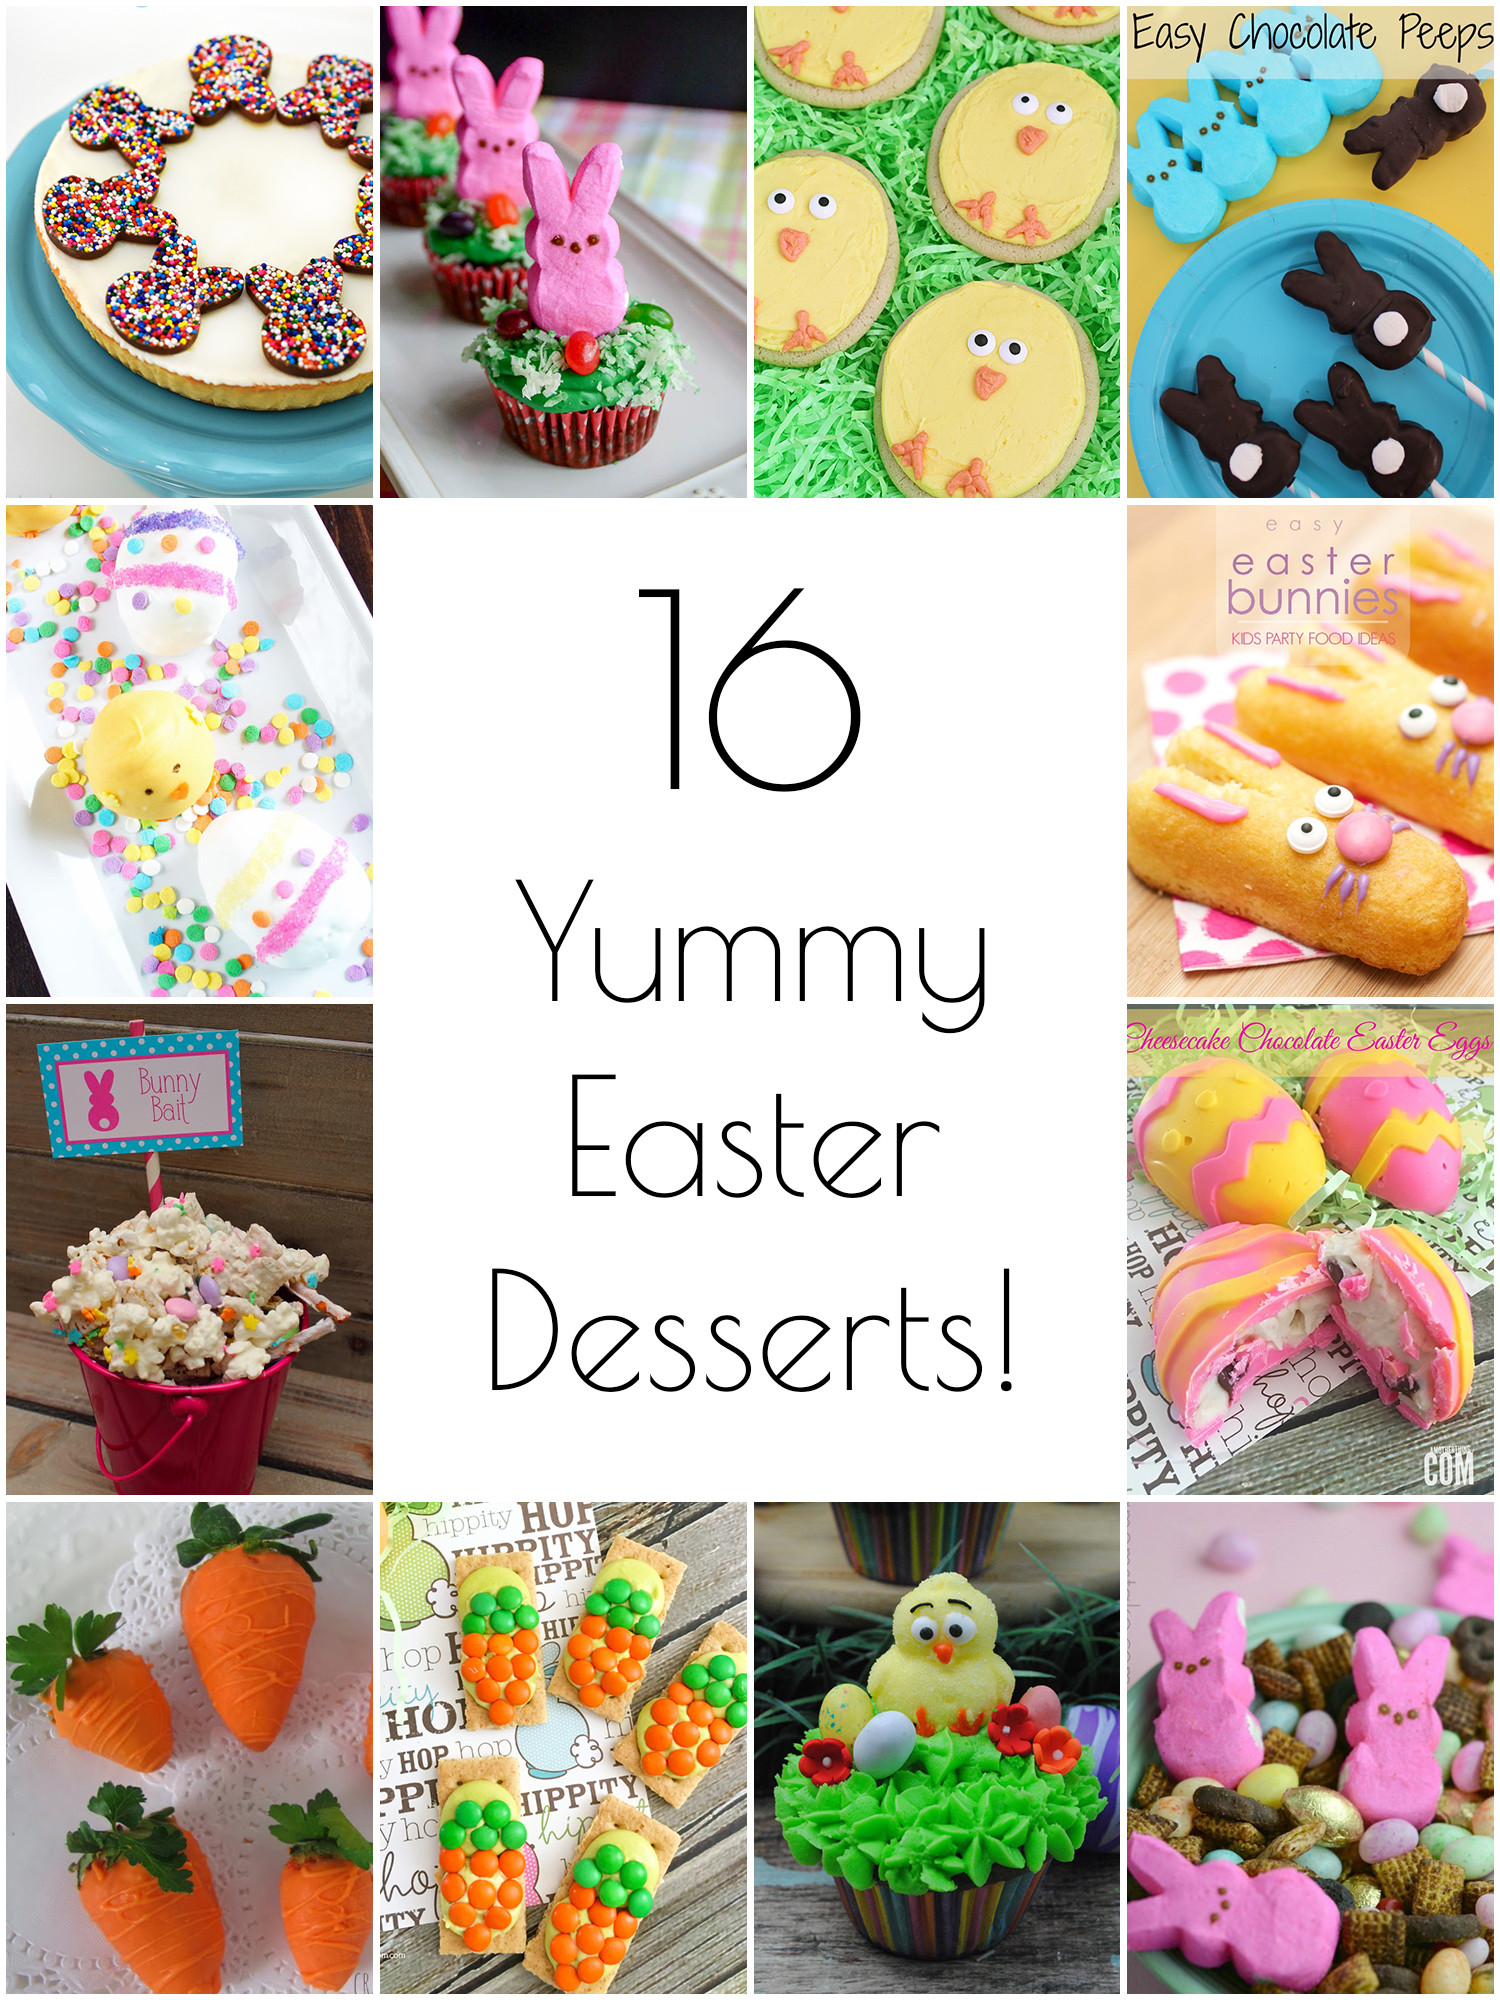 Creative Easter Desserts
 So Creative 16 Yummy Easter Desserts